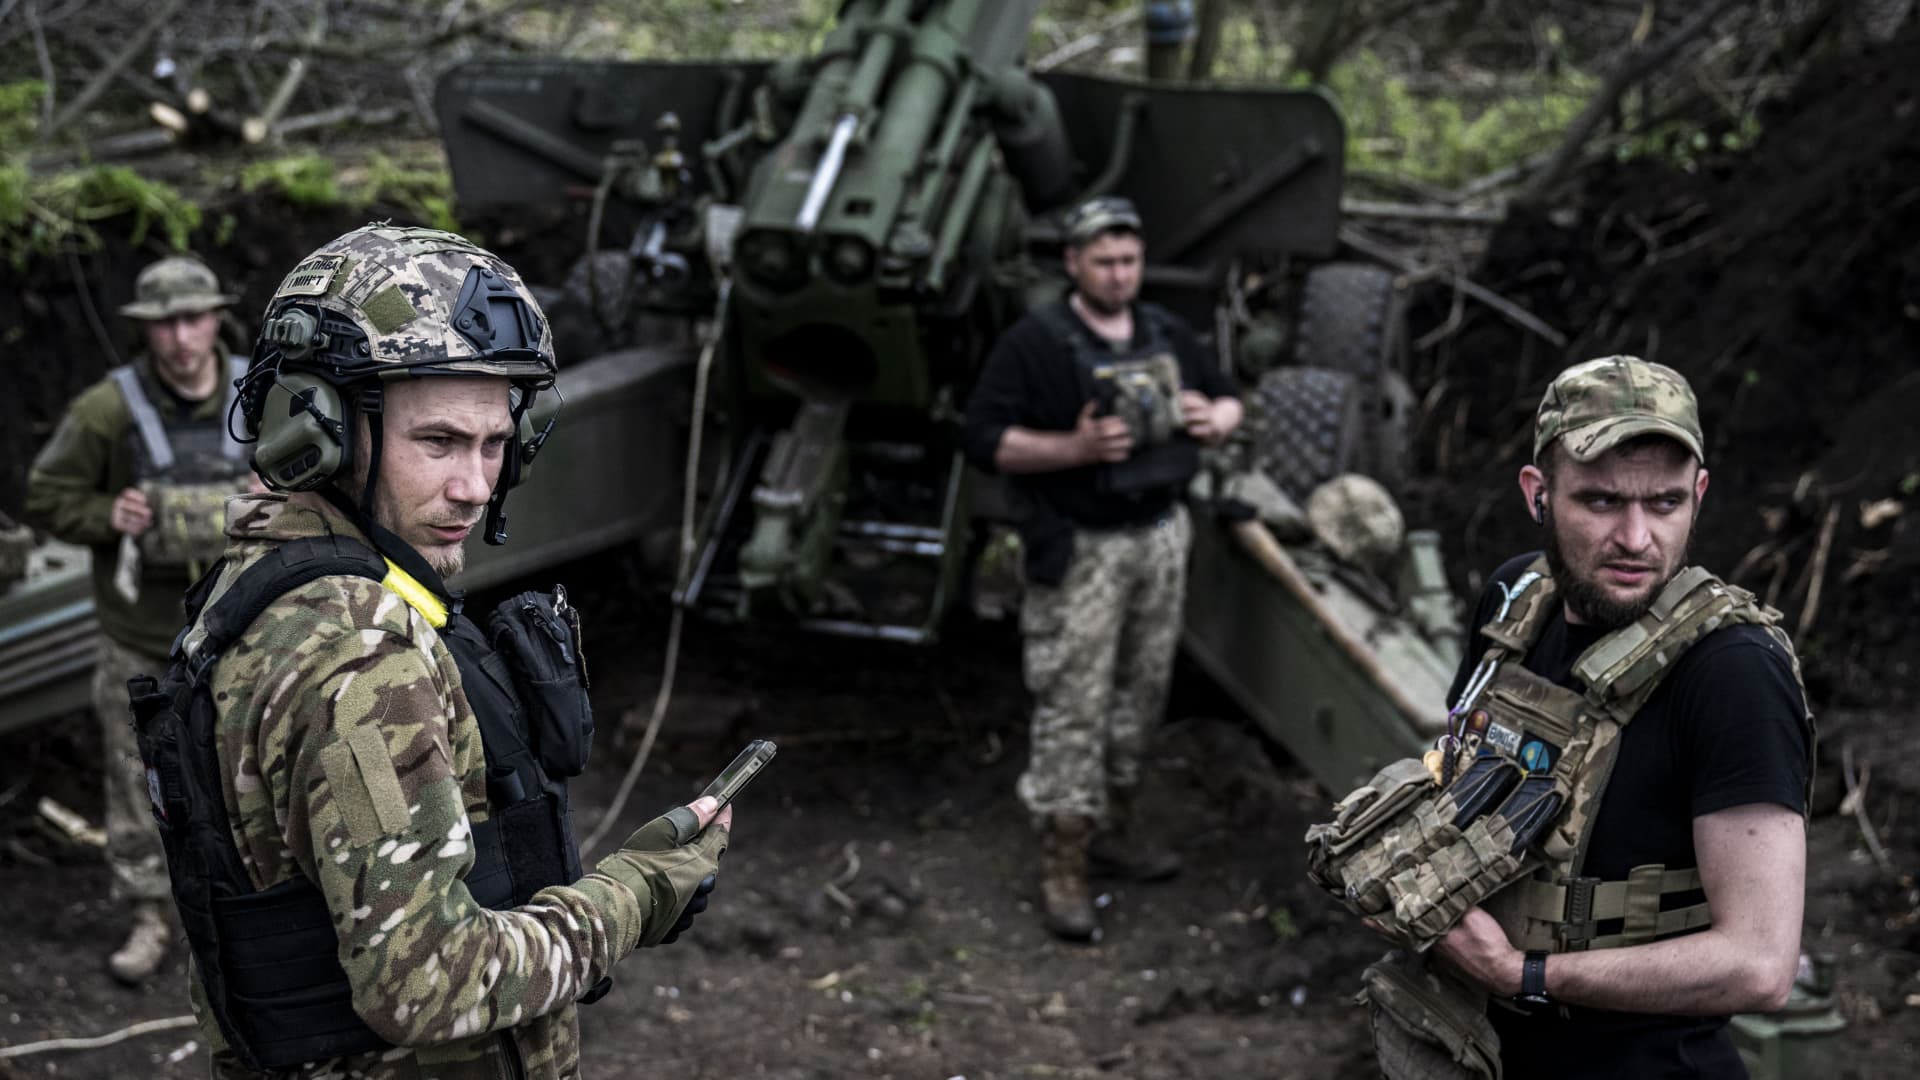 Ukrainian soldiers at their artillery position on the Donetsk front line as the Russia-Ukraine war continues in Donetsk Oblast, Ukraine, on April 24, 2023.